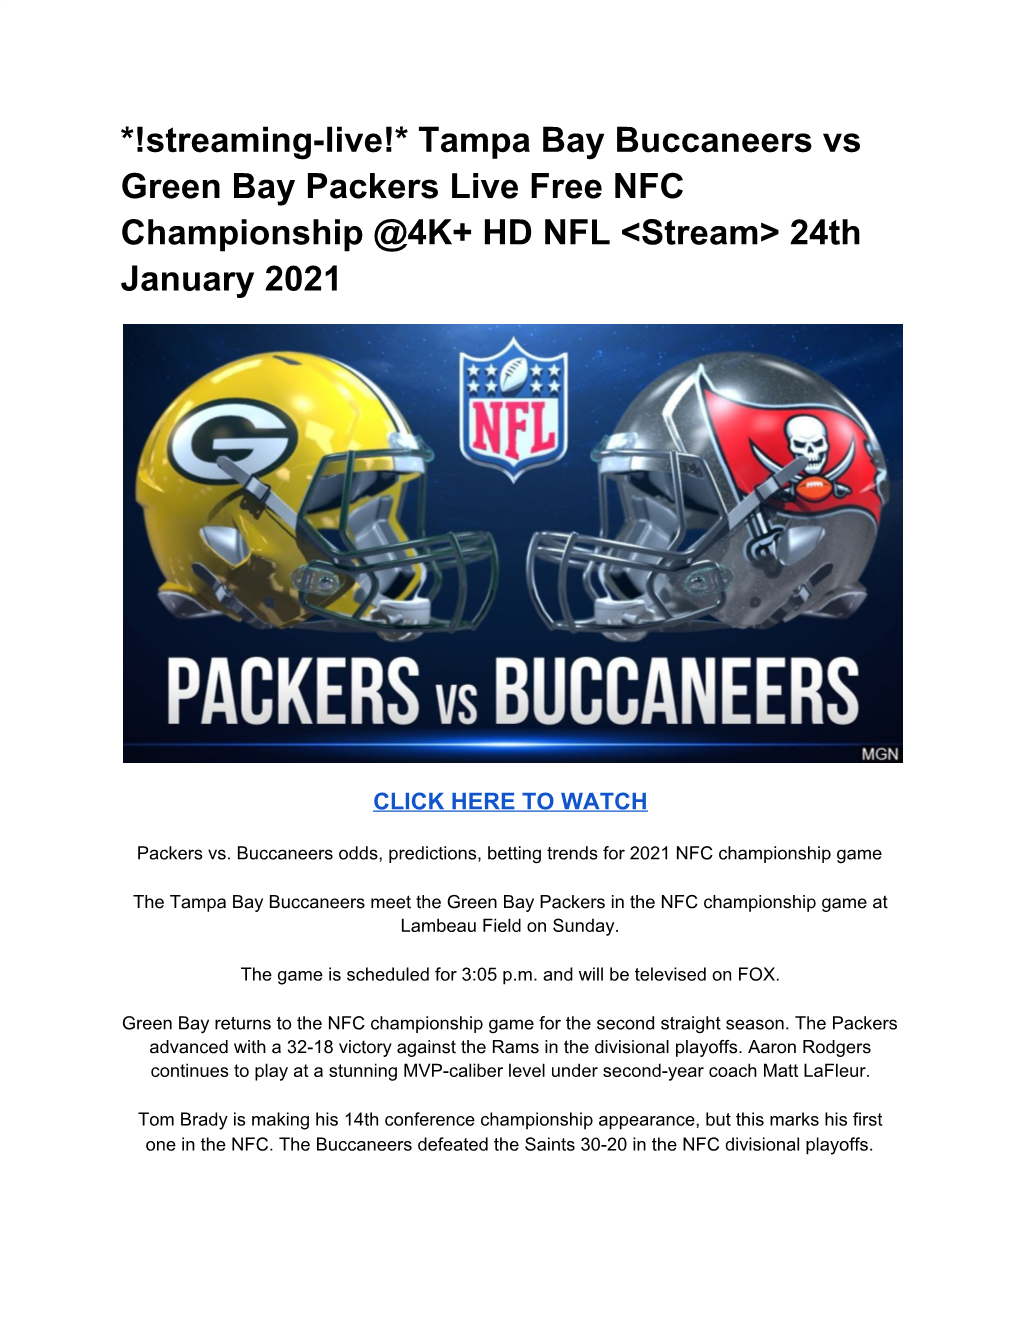 Tampa Bay Buccaneers Vs Green Bay Packers Live Free NFC